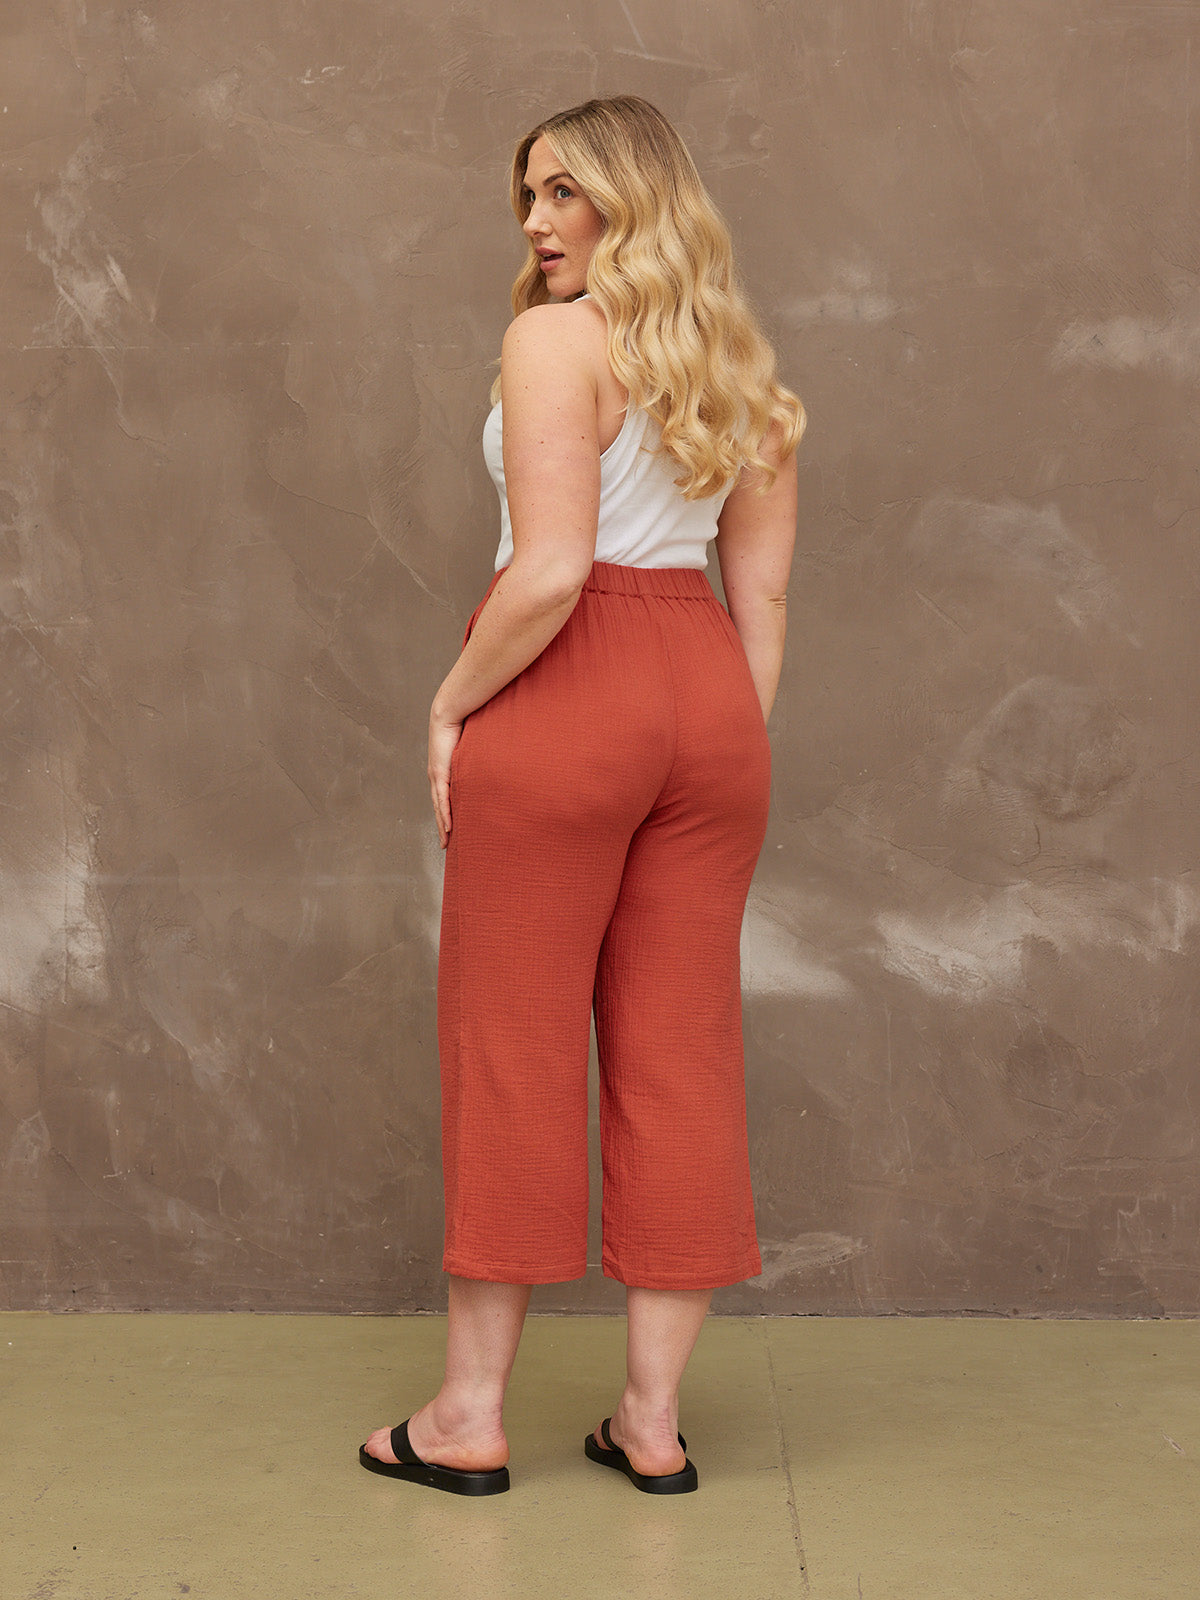 Maisie - Cotton Crinkle Culottes - Rust